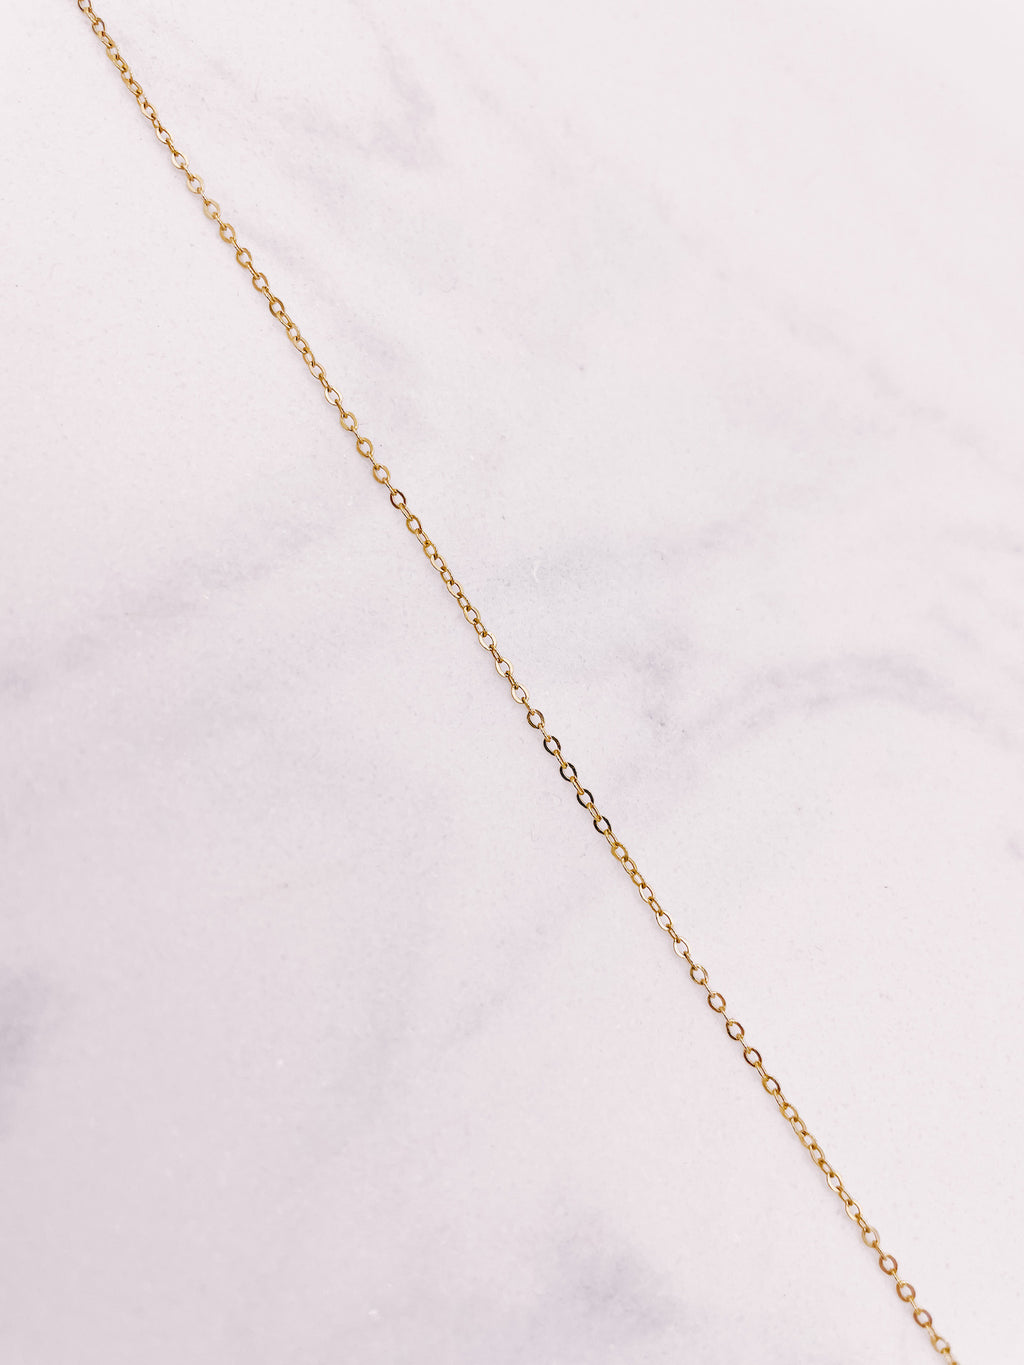 Close up of Fine Chain Necklace from AW Boutique gold filled jewellery.